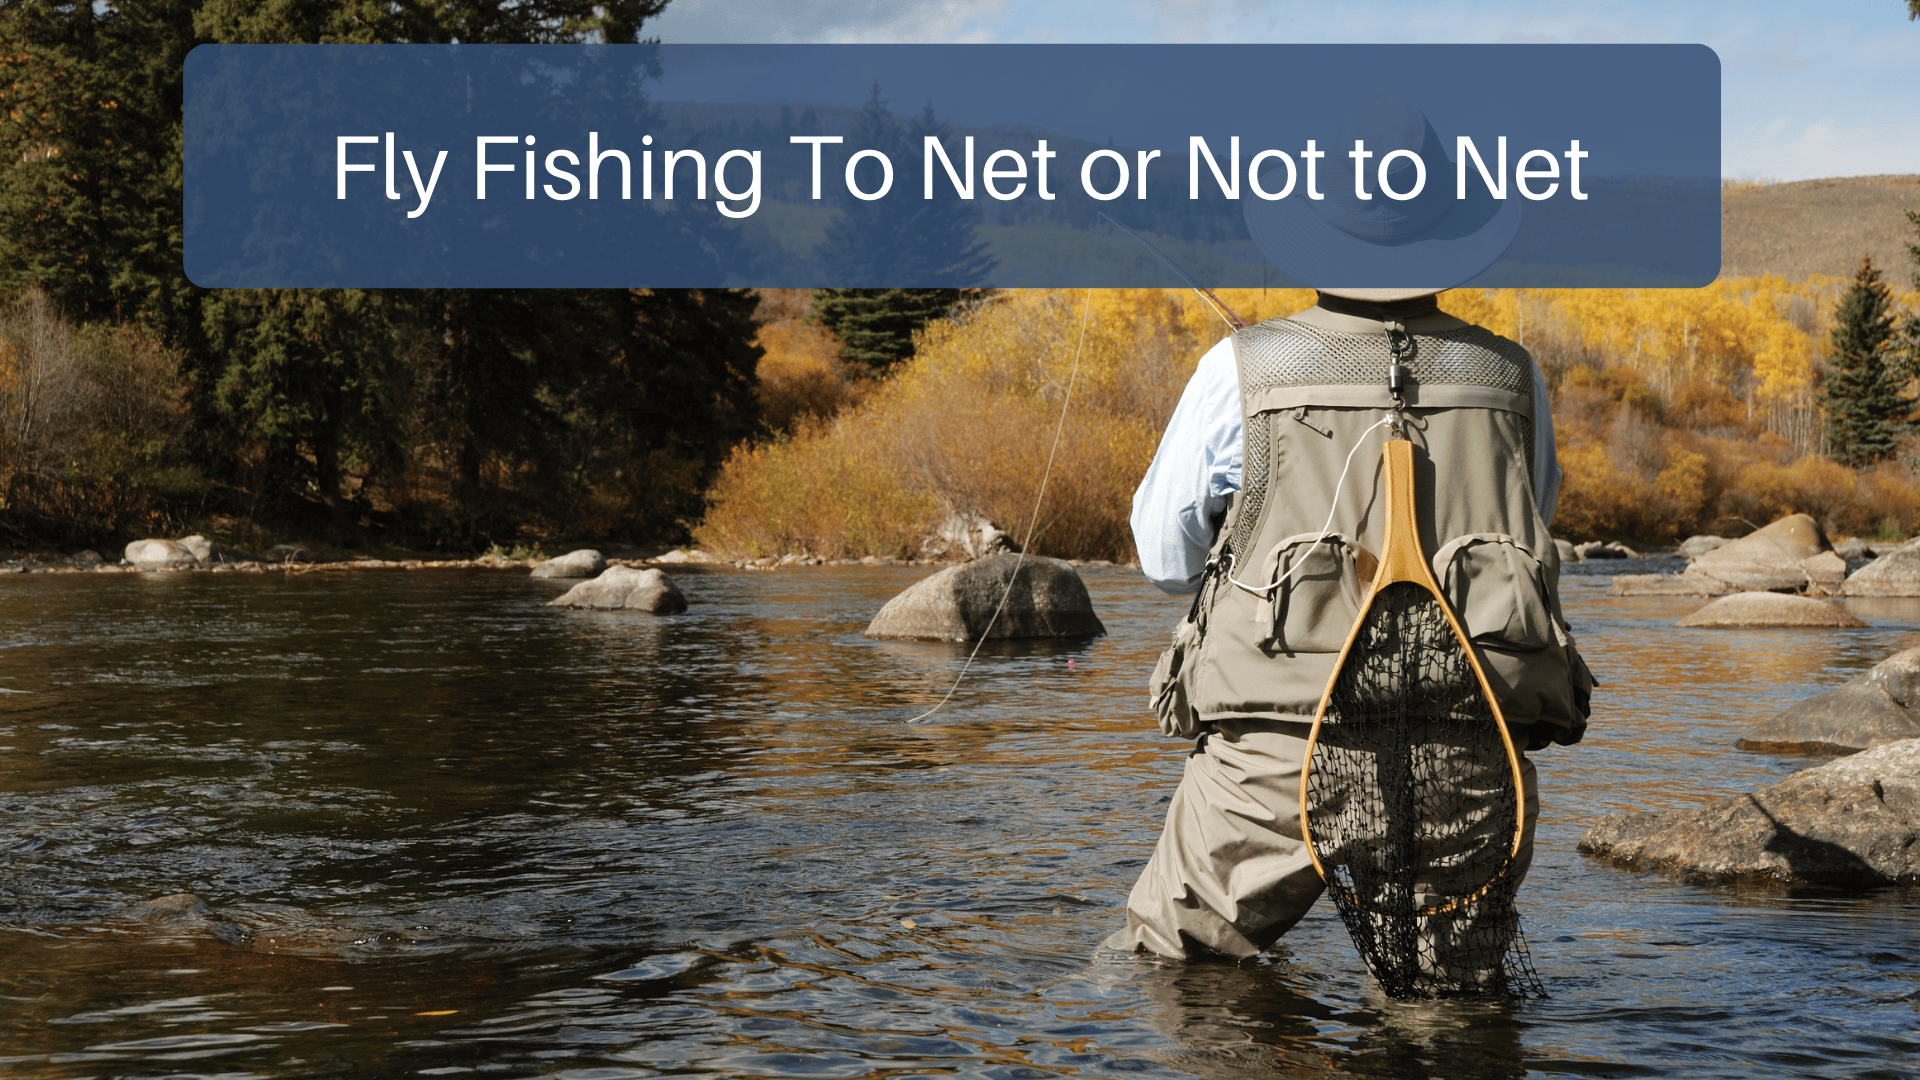 Fly Fishing To Net or Not to Net